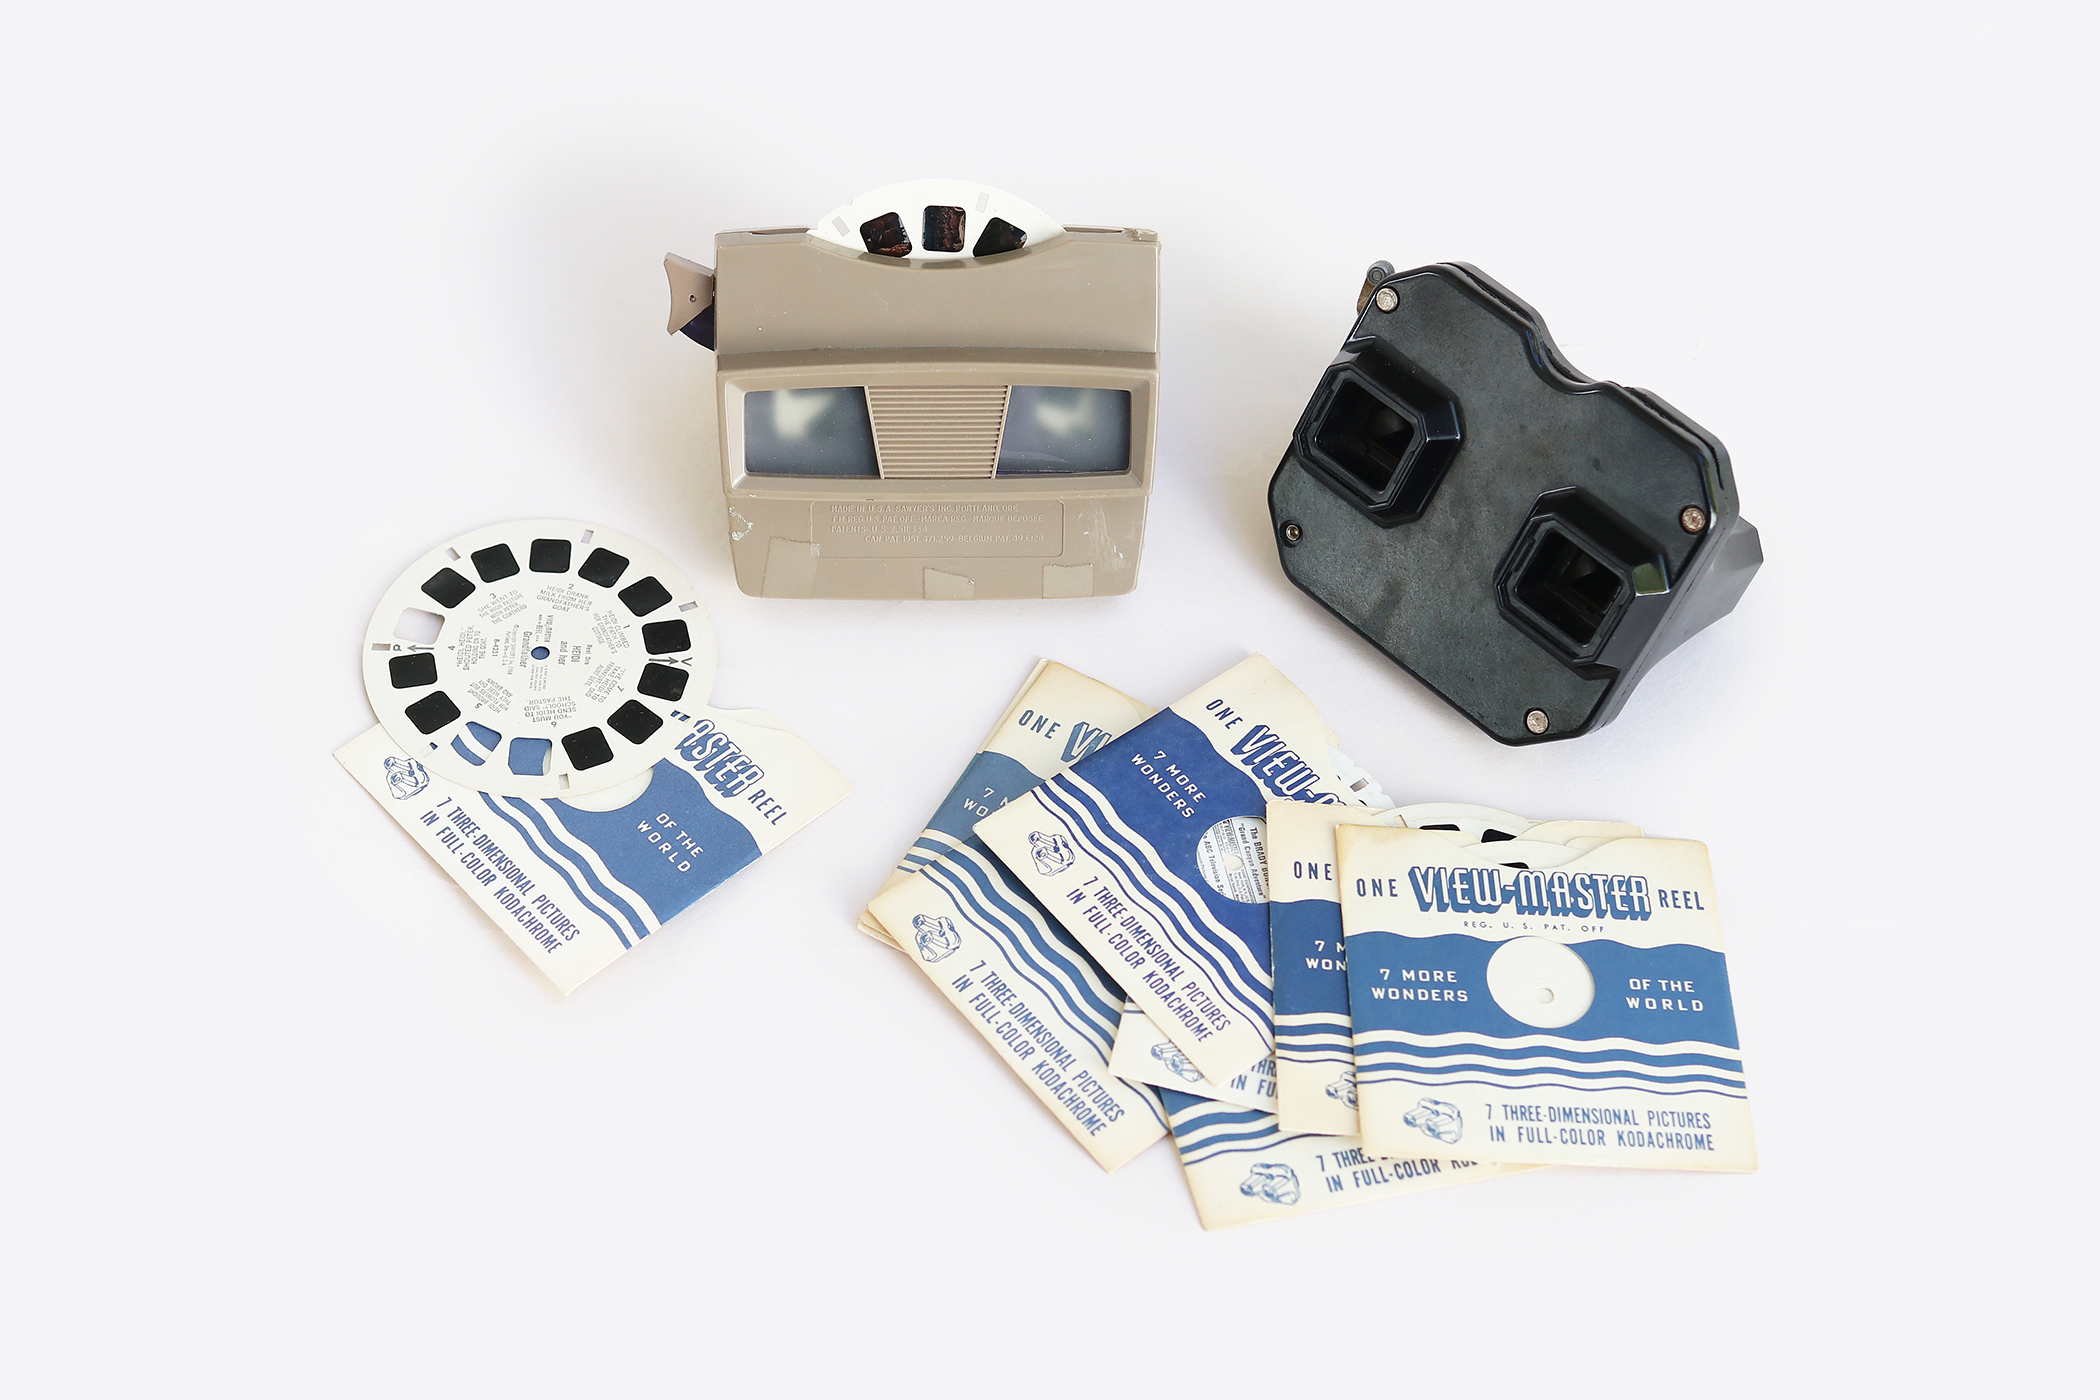 VIEW-MASTER